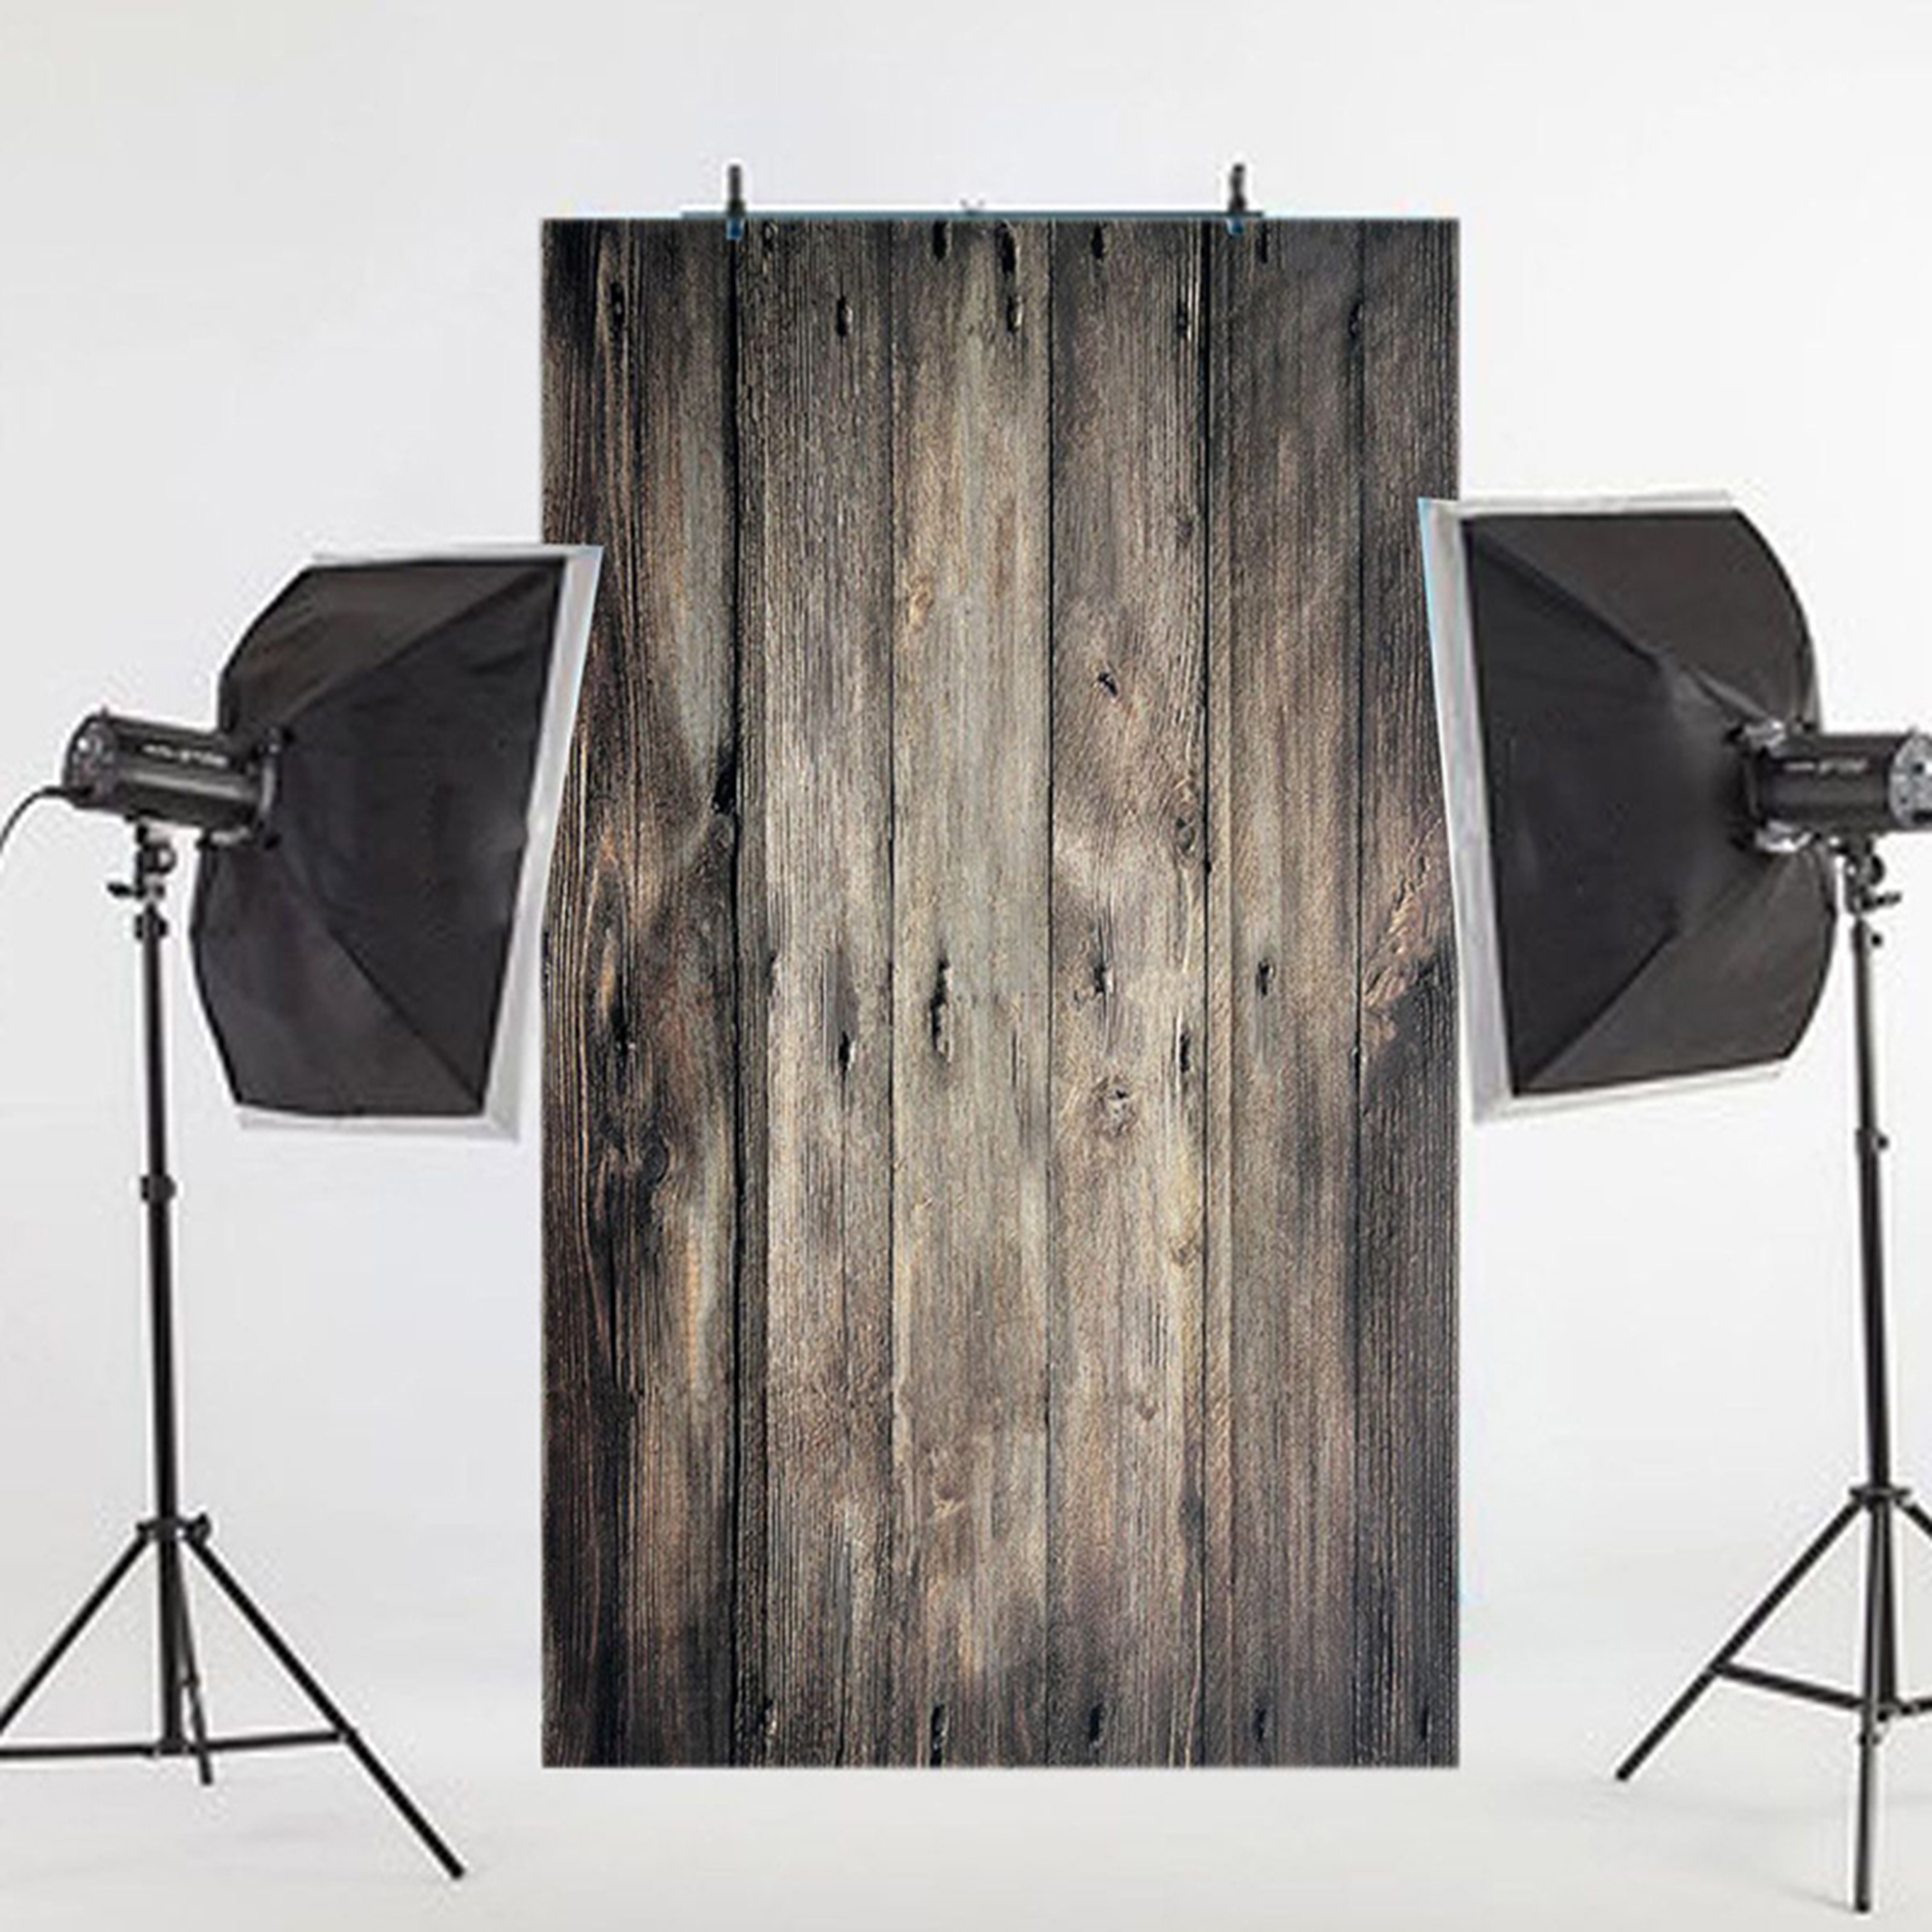 3X5ft Studio Photo Video Photography Backdrop Background Photo Booth Background Screen Props Photo Studio Props Vinyl Screen Studio Photo Props - image 2 of 4